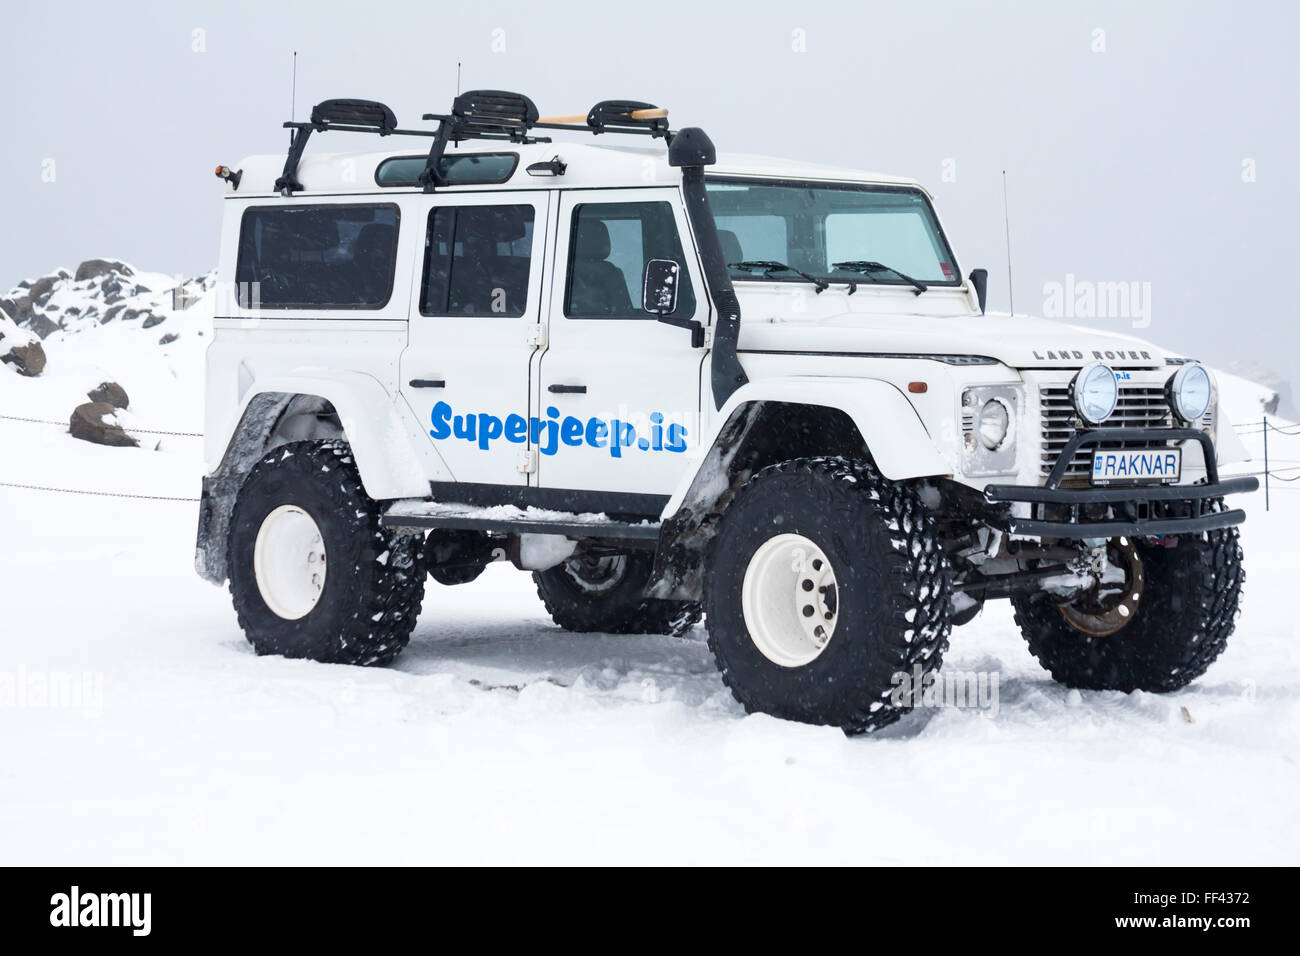 Superjeep Land Rover parked in snow in Iceland in January - Super jeep Stock Photo